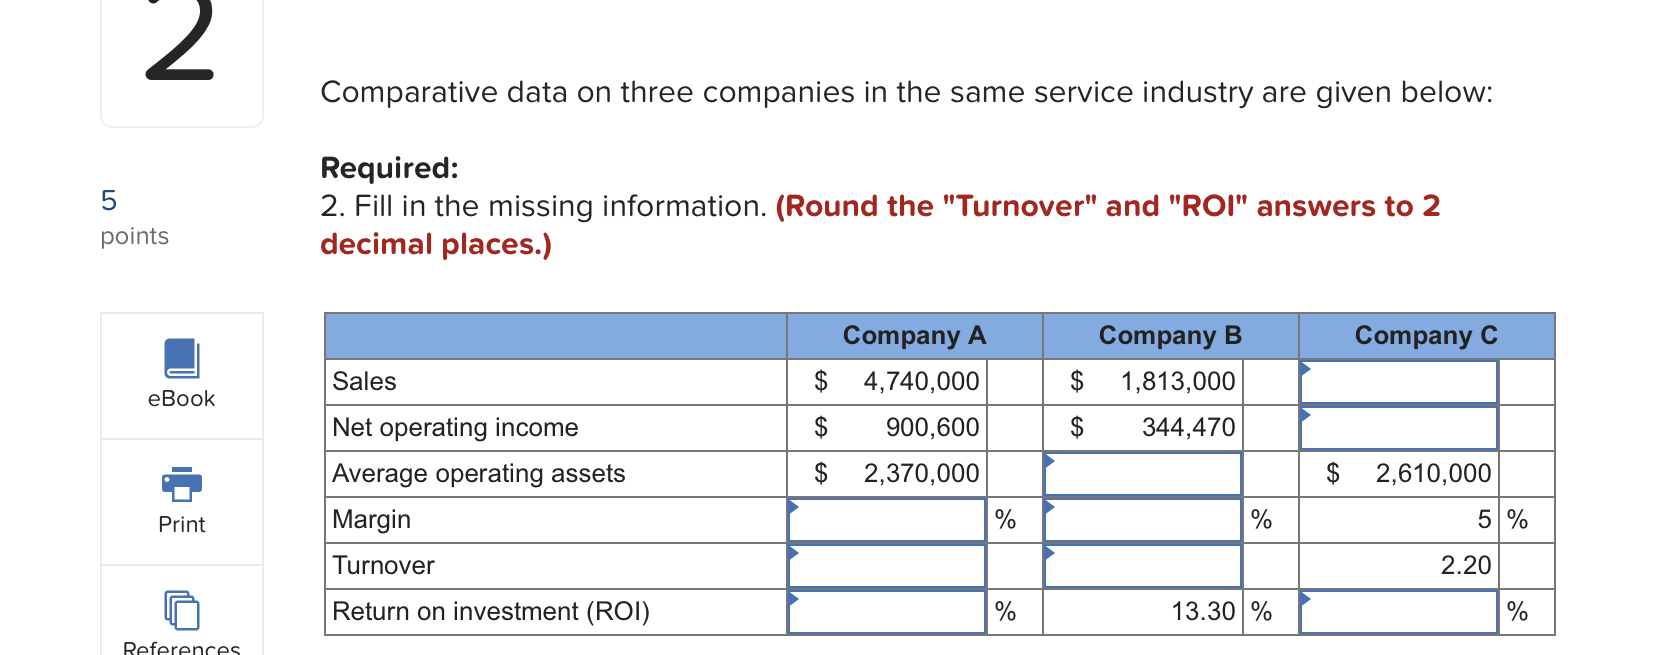 Comparative data on three companies in the same service industry are given below:
Required:
2. Fill in the missing informatio